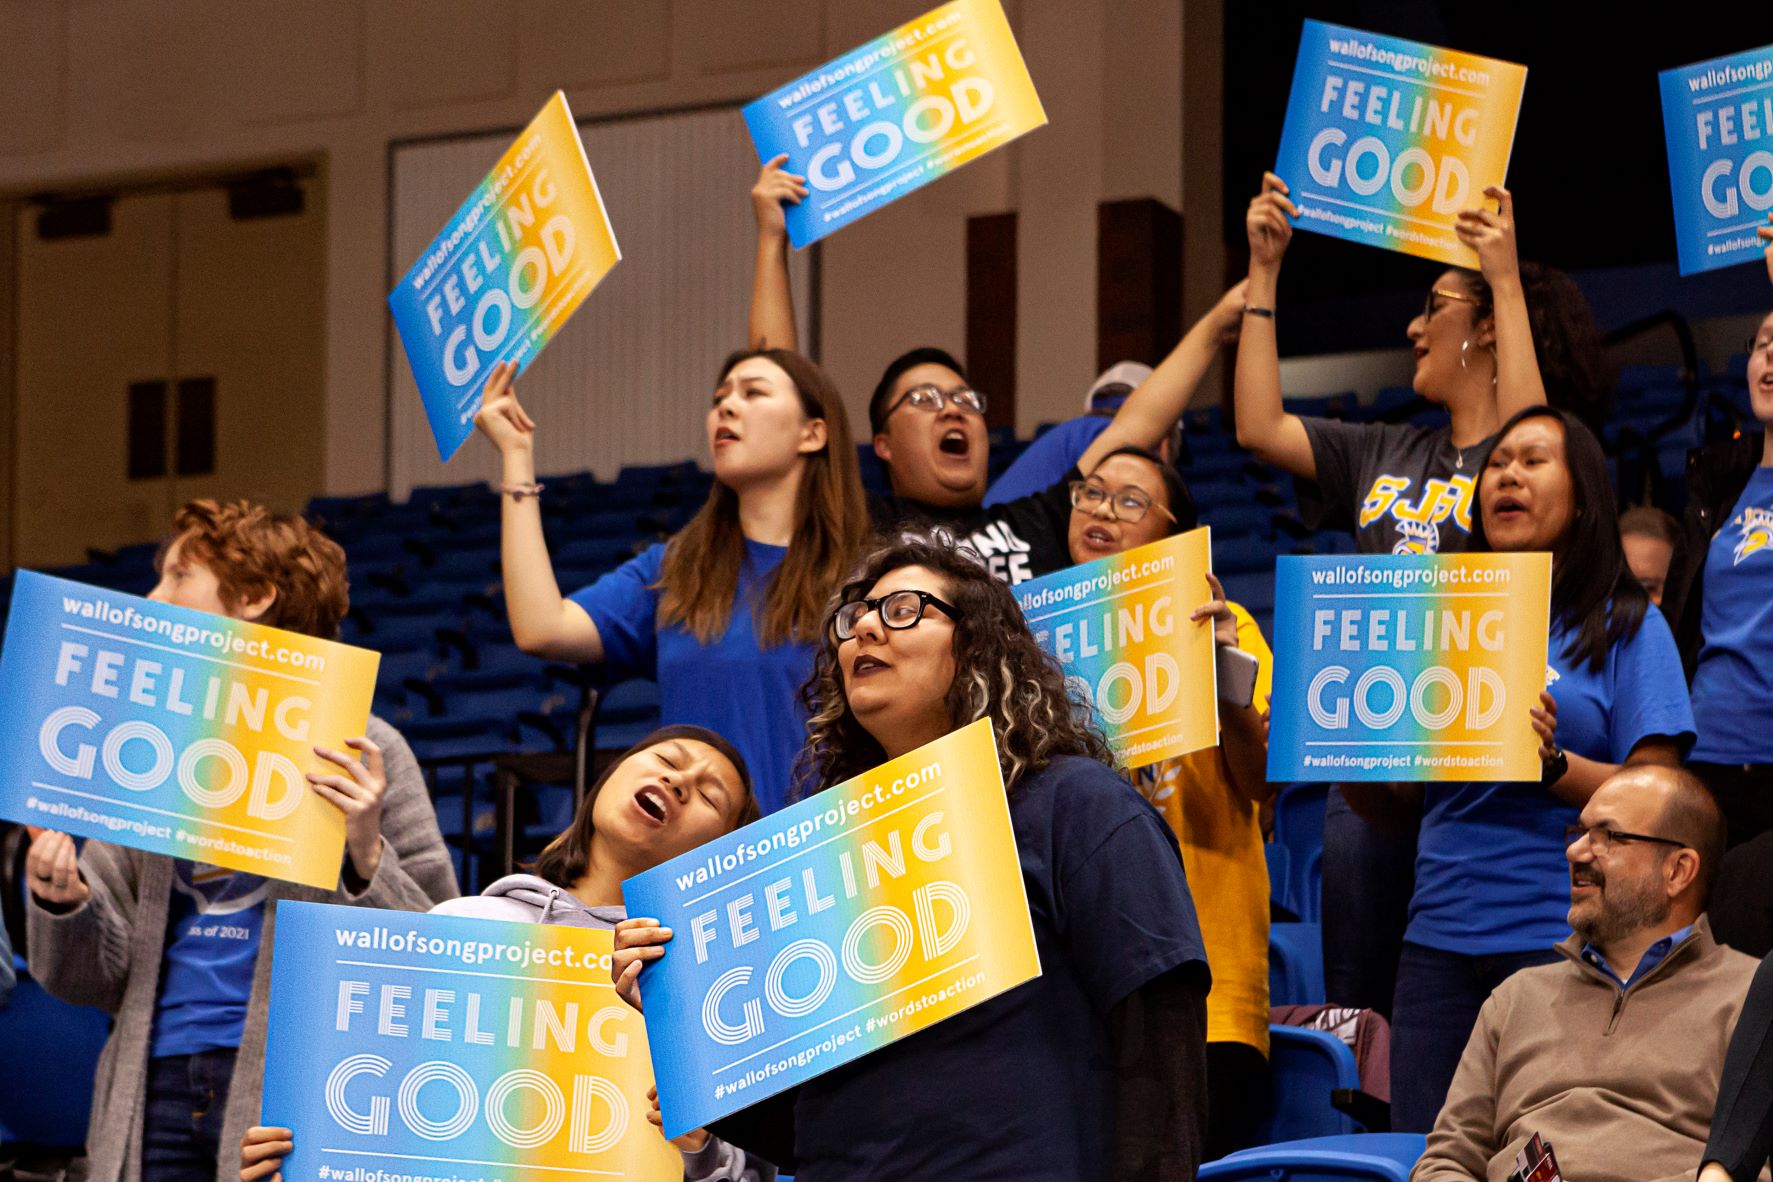 Crowd of people singing while holding 'Feeling Good' signs